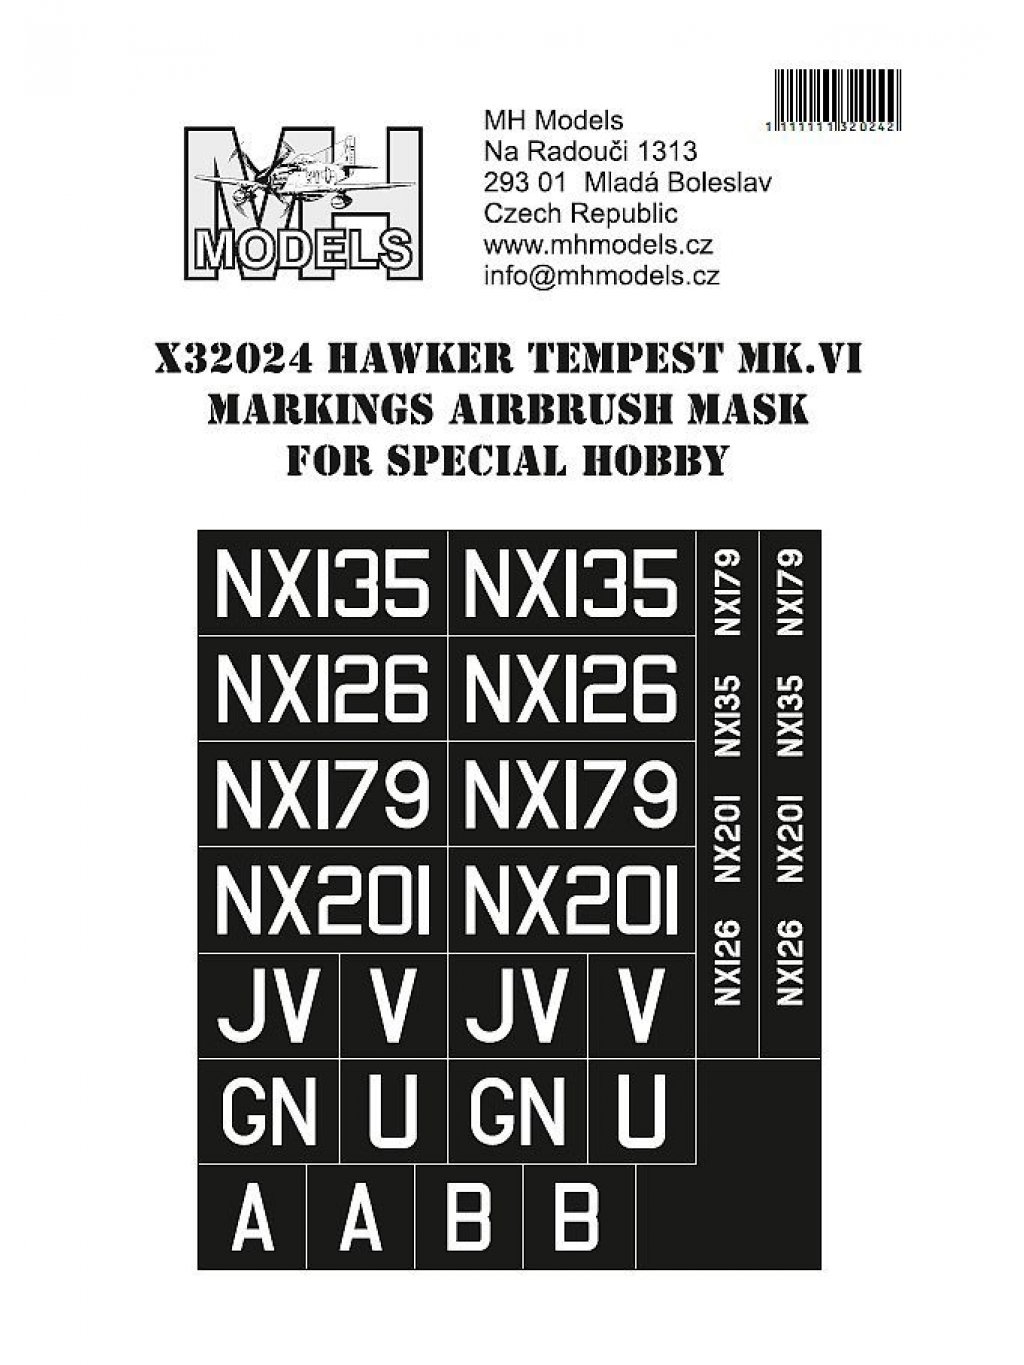 Hawker Tempest Mk.VI Markings airbrush mask for Special Hobby